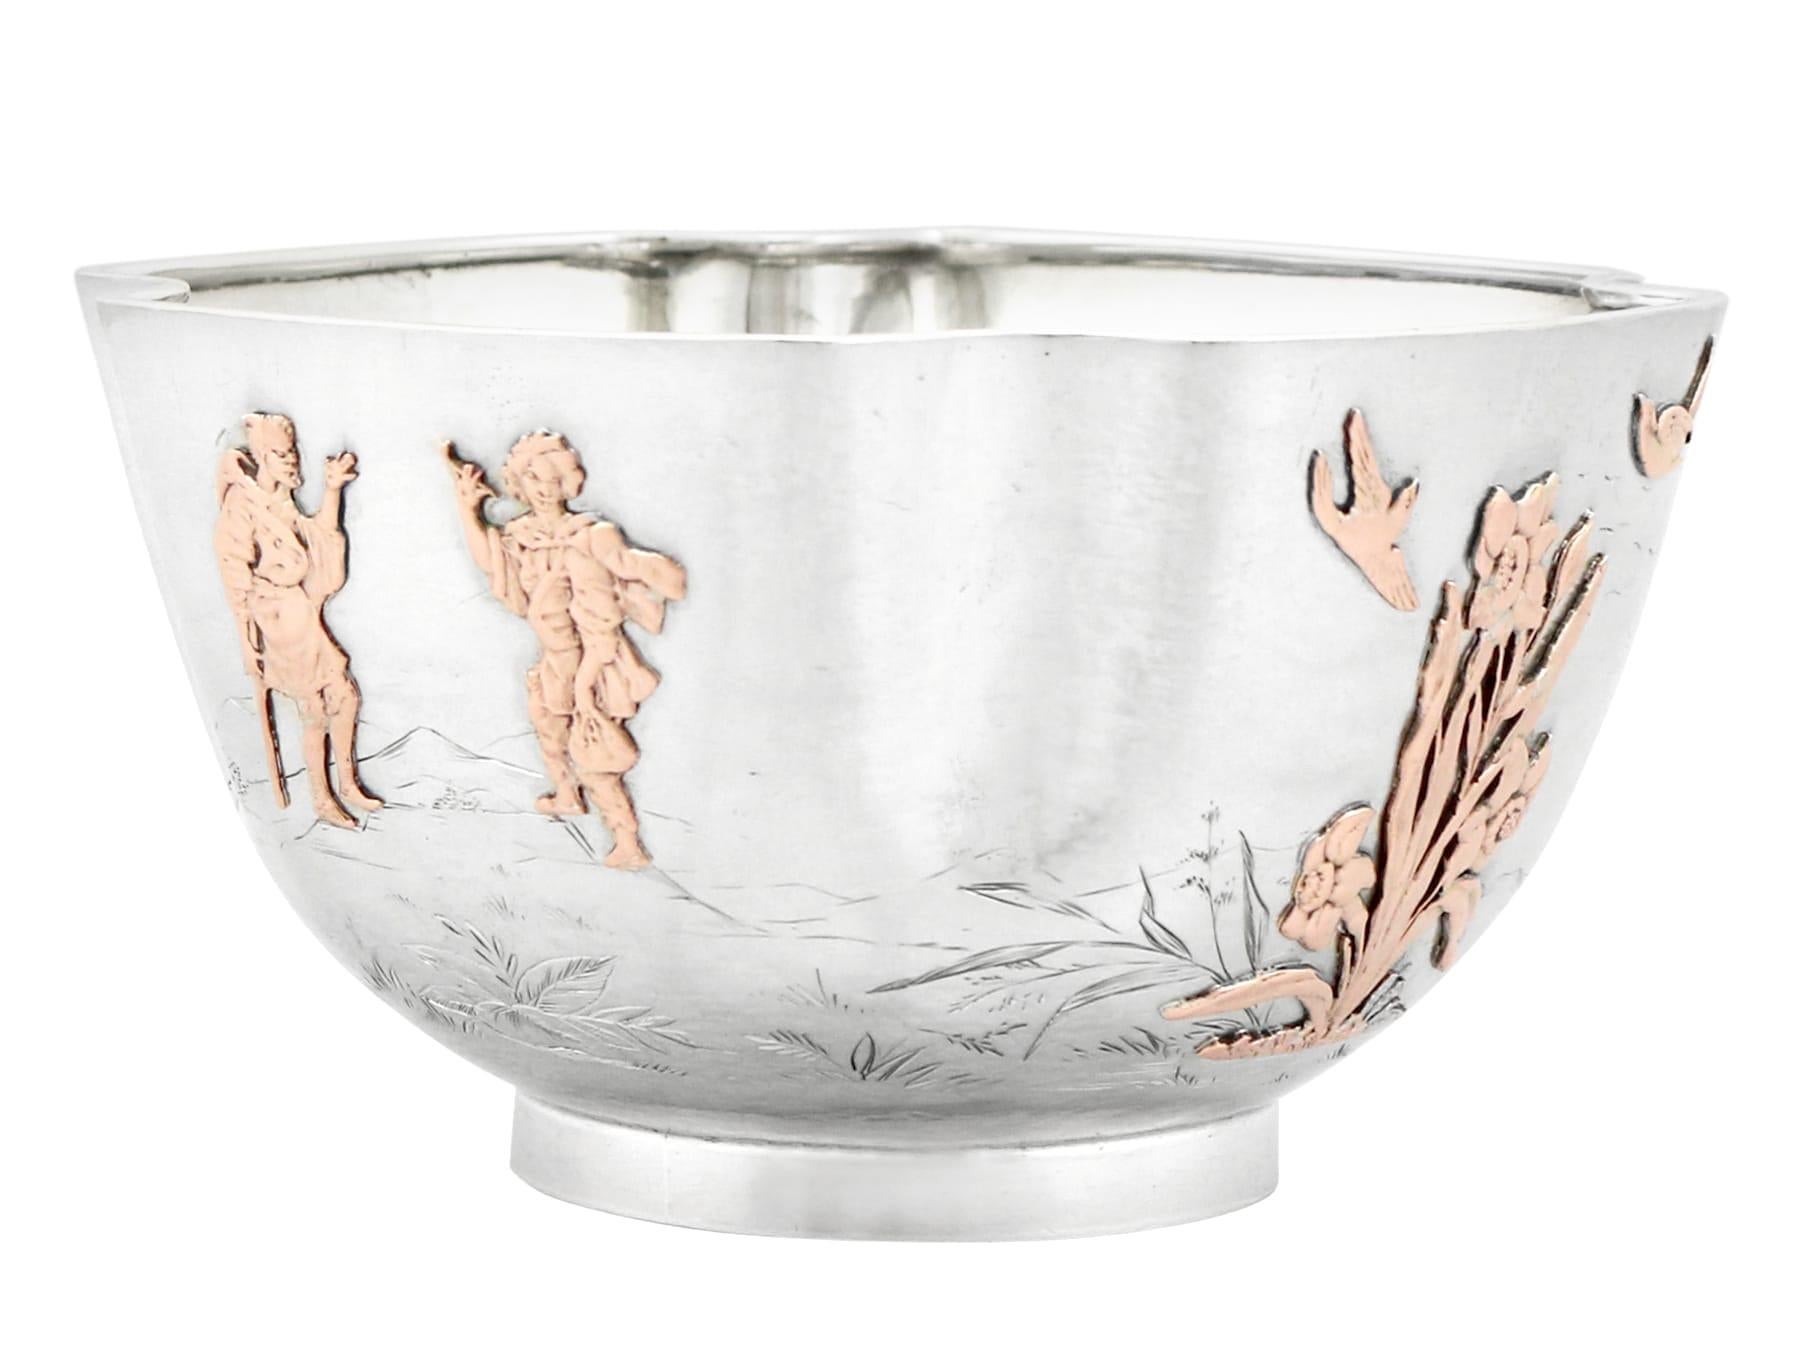 An exceptional, fine and impressive antique American sterling silver bowl made by Gorham Manufacturing Company; an addition to AC Silver's dining silverware collection.

This exceptional antique American sterling silver bowl has a square rounded